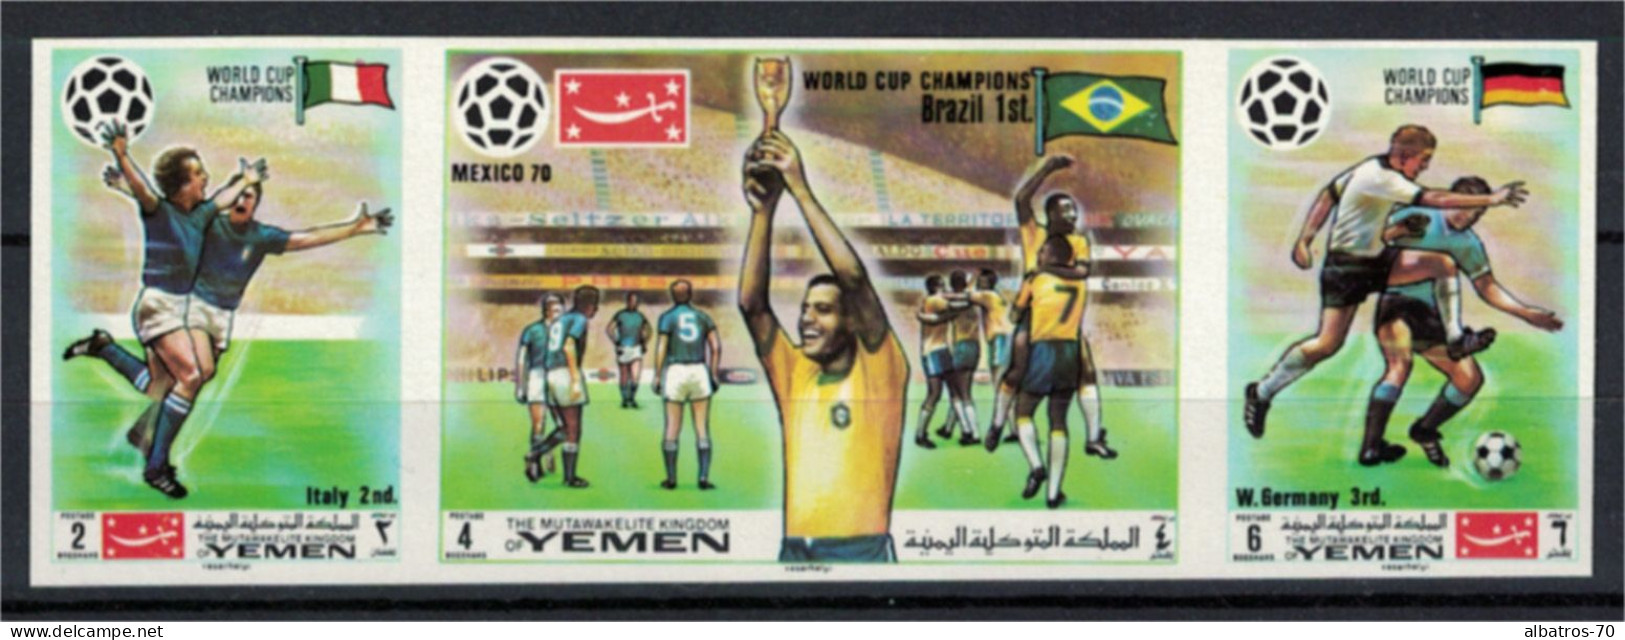 Yemen (Kingdom) 1970 _ Winner Of Football World Cup - Mexico '70 _ Imperforated MNH ** - 1970 – Mexique